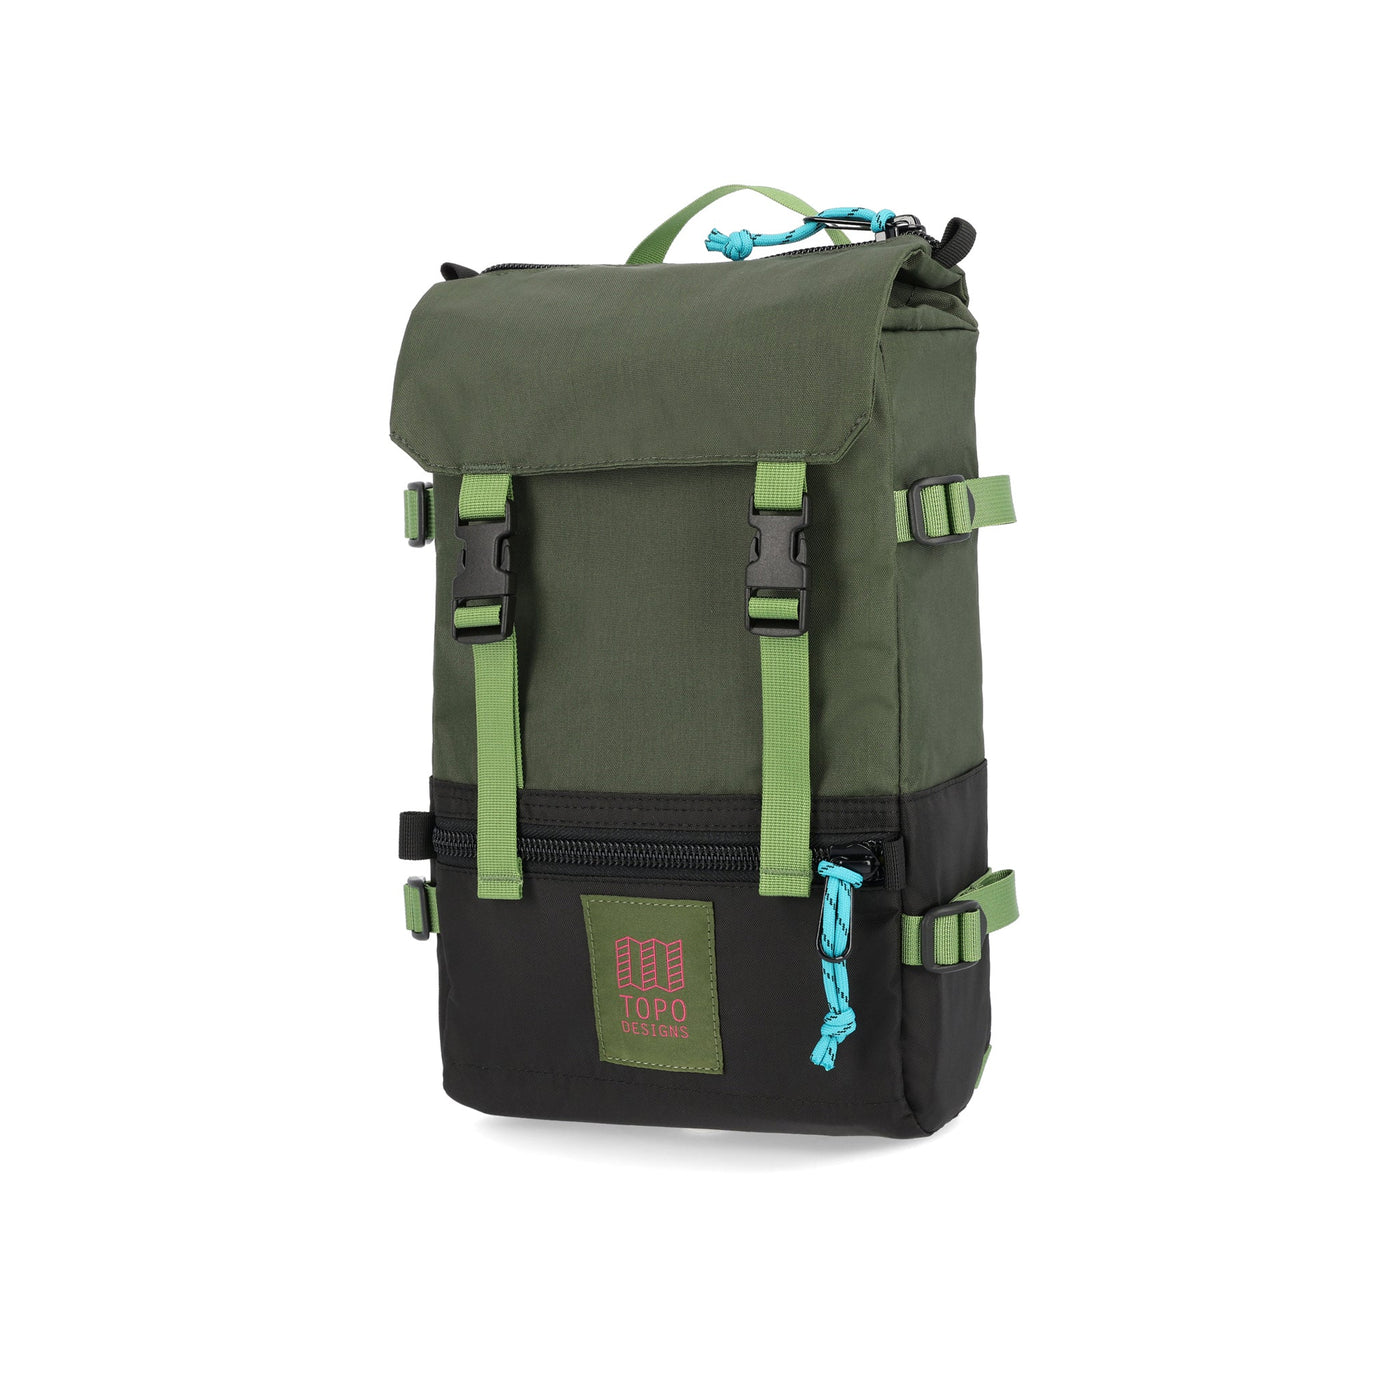 Topo Designs Rover Pack Mini backpack in recycled "Olive / Black" green